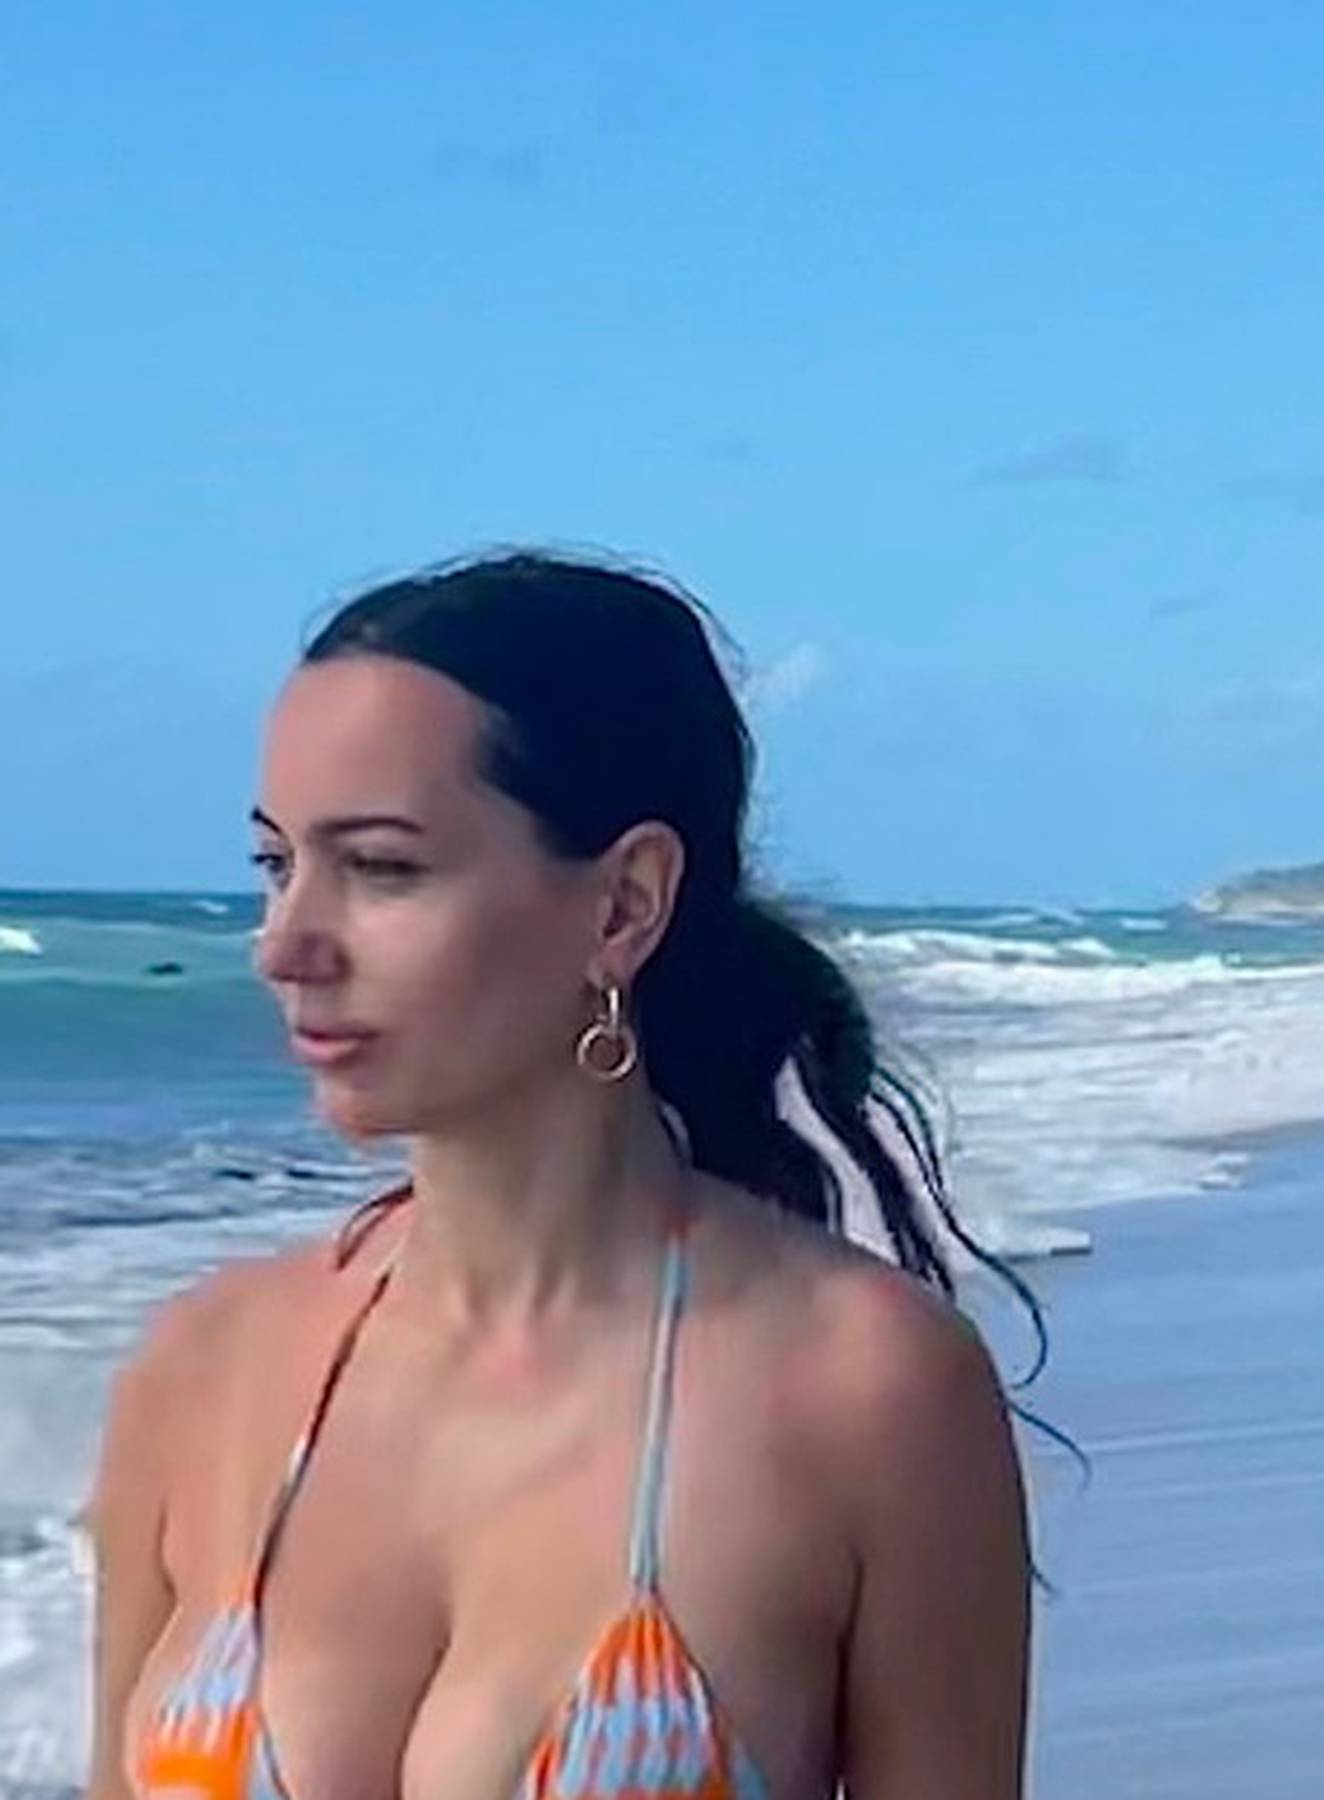 European model Iva Kovacevic and Mariana Pierce show off their bikini bodies in the hot sun during birthday party in Puerto Rico